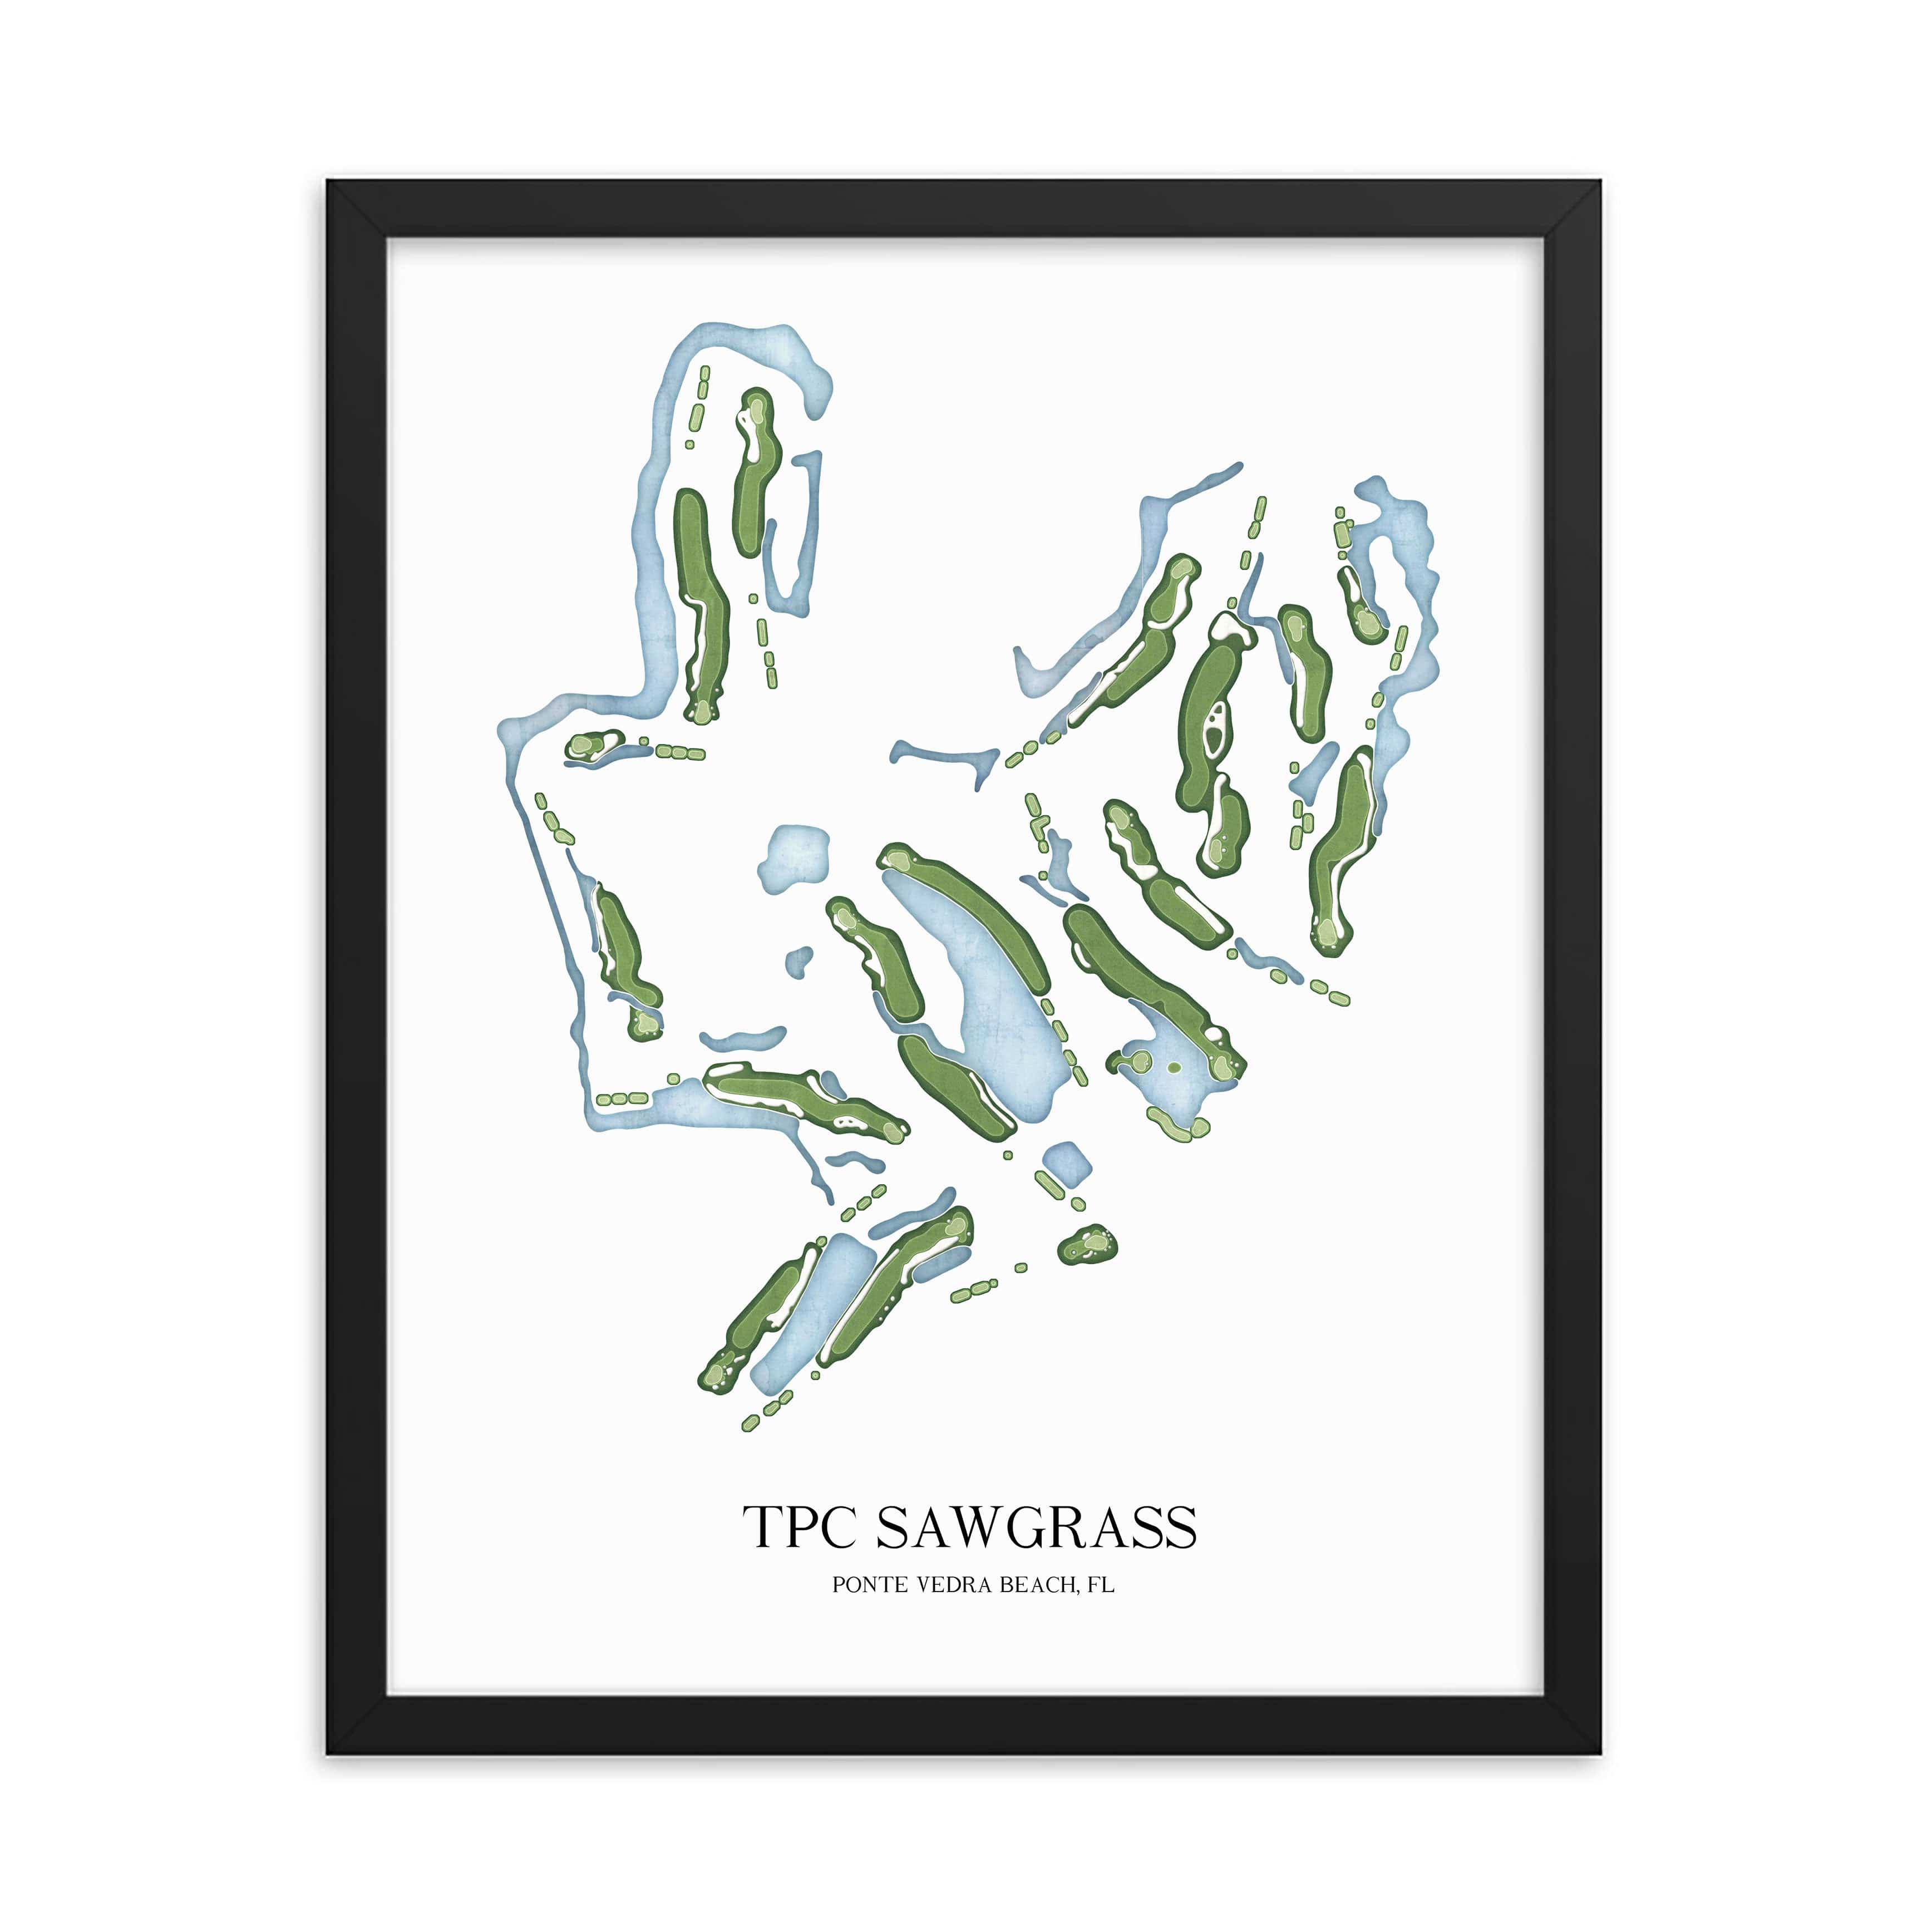 The 19th Hole Golf Shop - Golf Course Prints -  TPC Sawgrass Golf Course Map